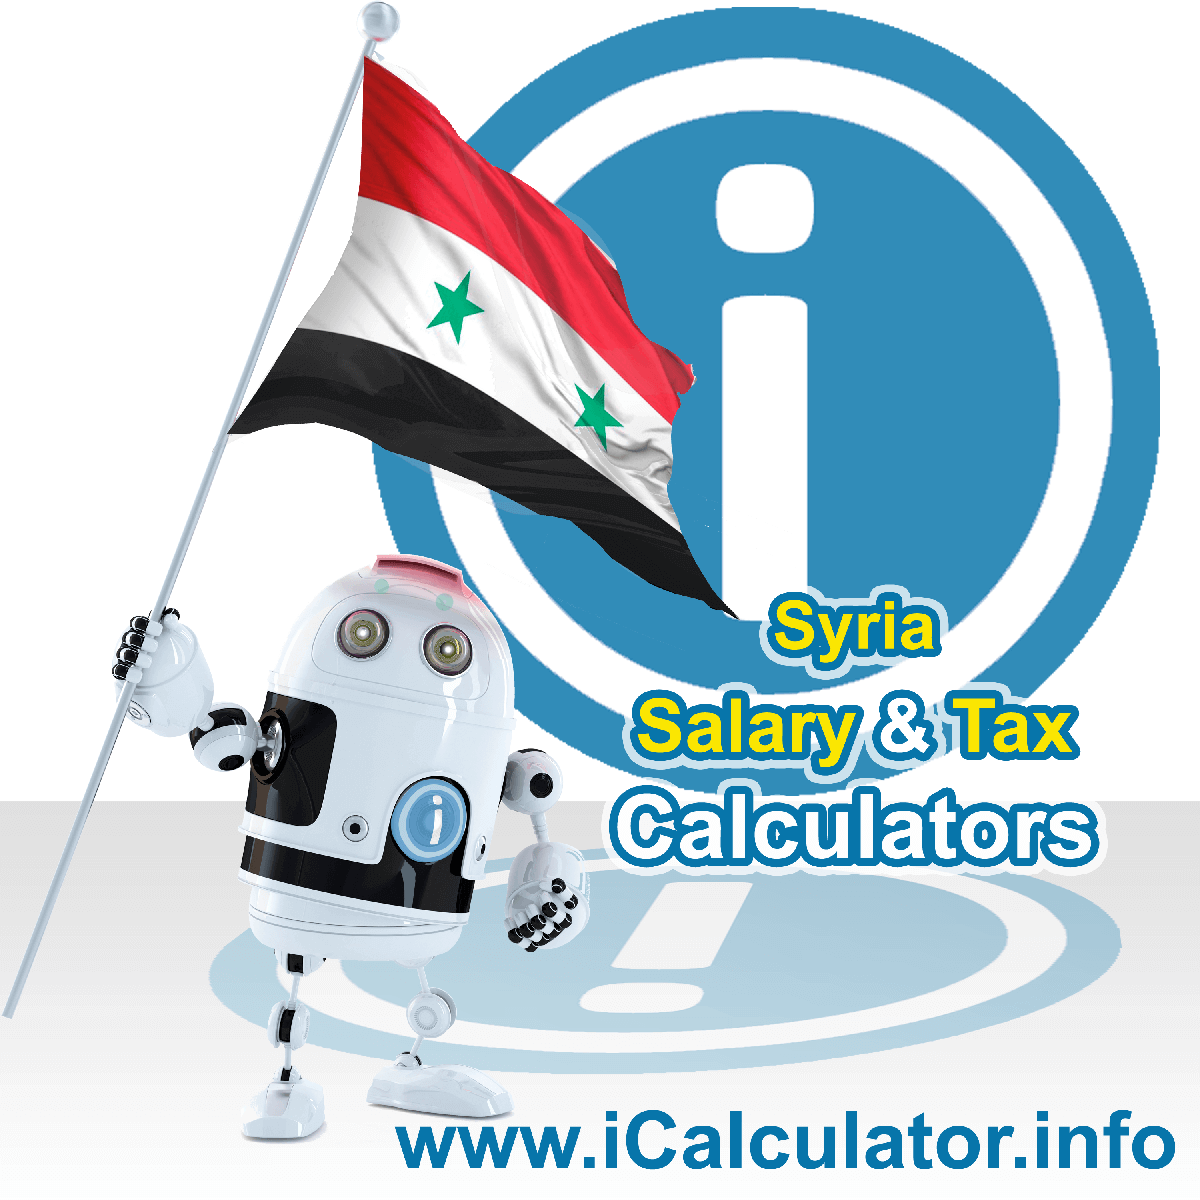 Syria Wage Calculator. This image shows the Syria flag and information relating to the tax formula for the Syria Tax Calculator